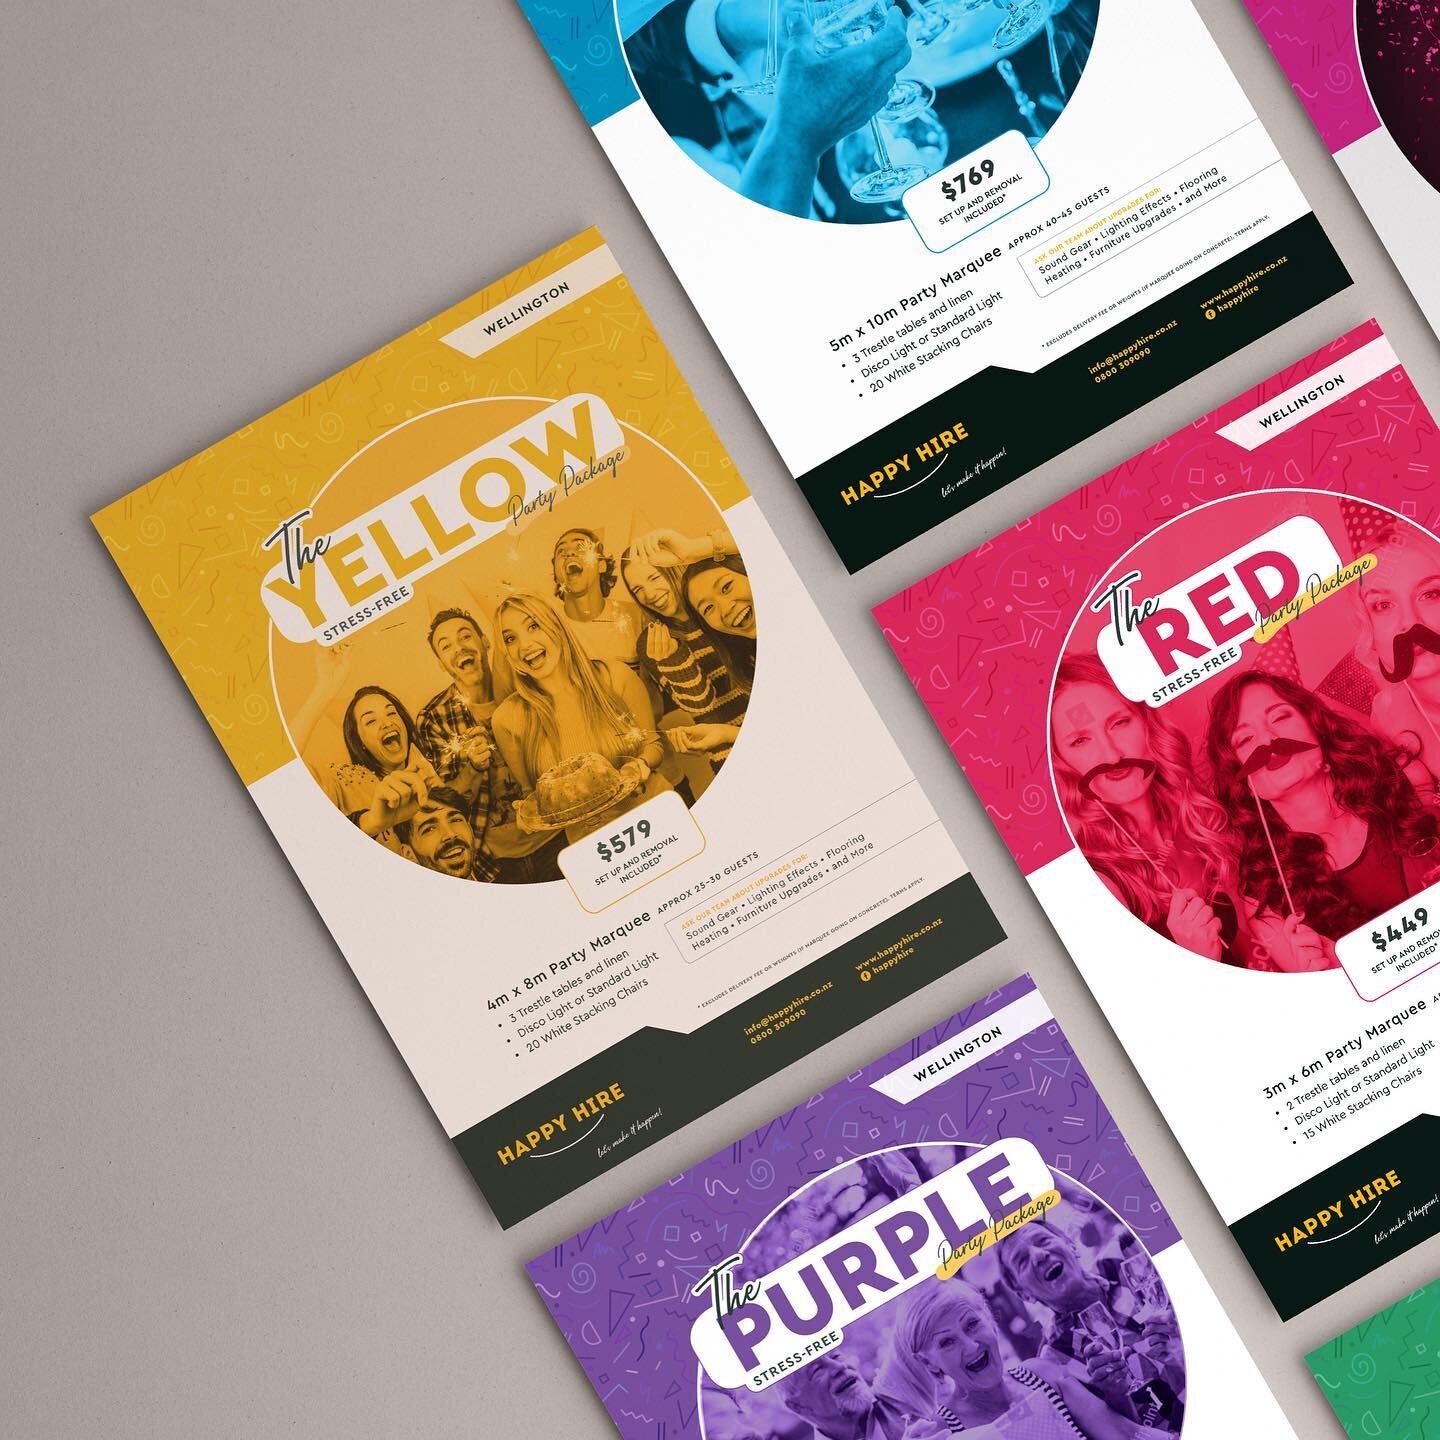 A brand you can have fun with.

Happy Hire recently went through a brand refresh and we helped bring to life their new marketing material across their three NZ locations.

Q&amp;A worked with Happy Hire on their print and digital marketing material t